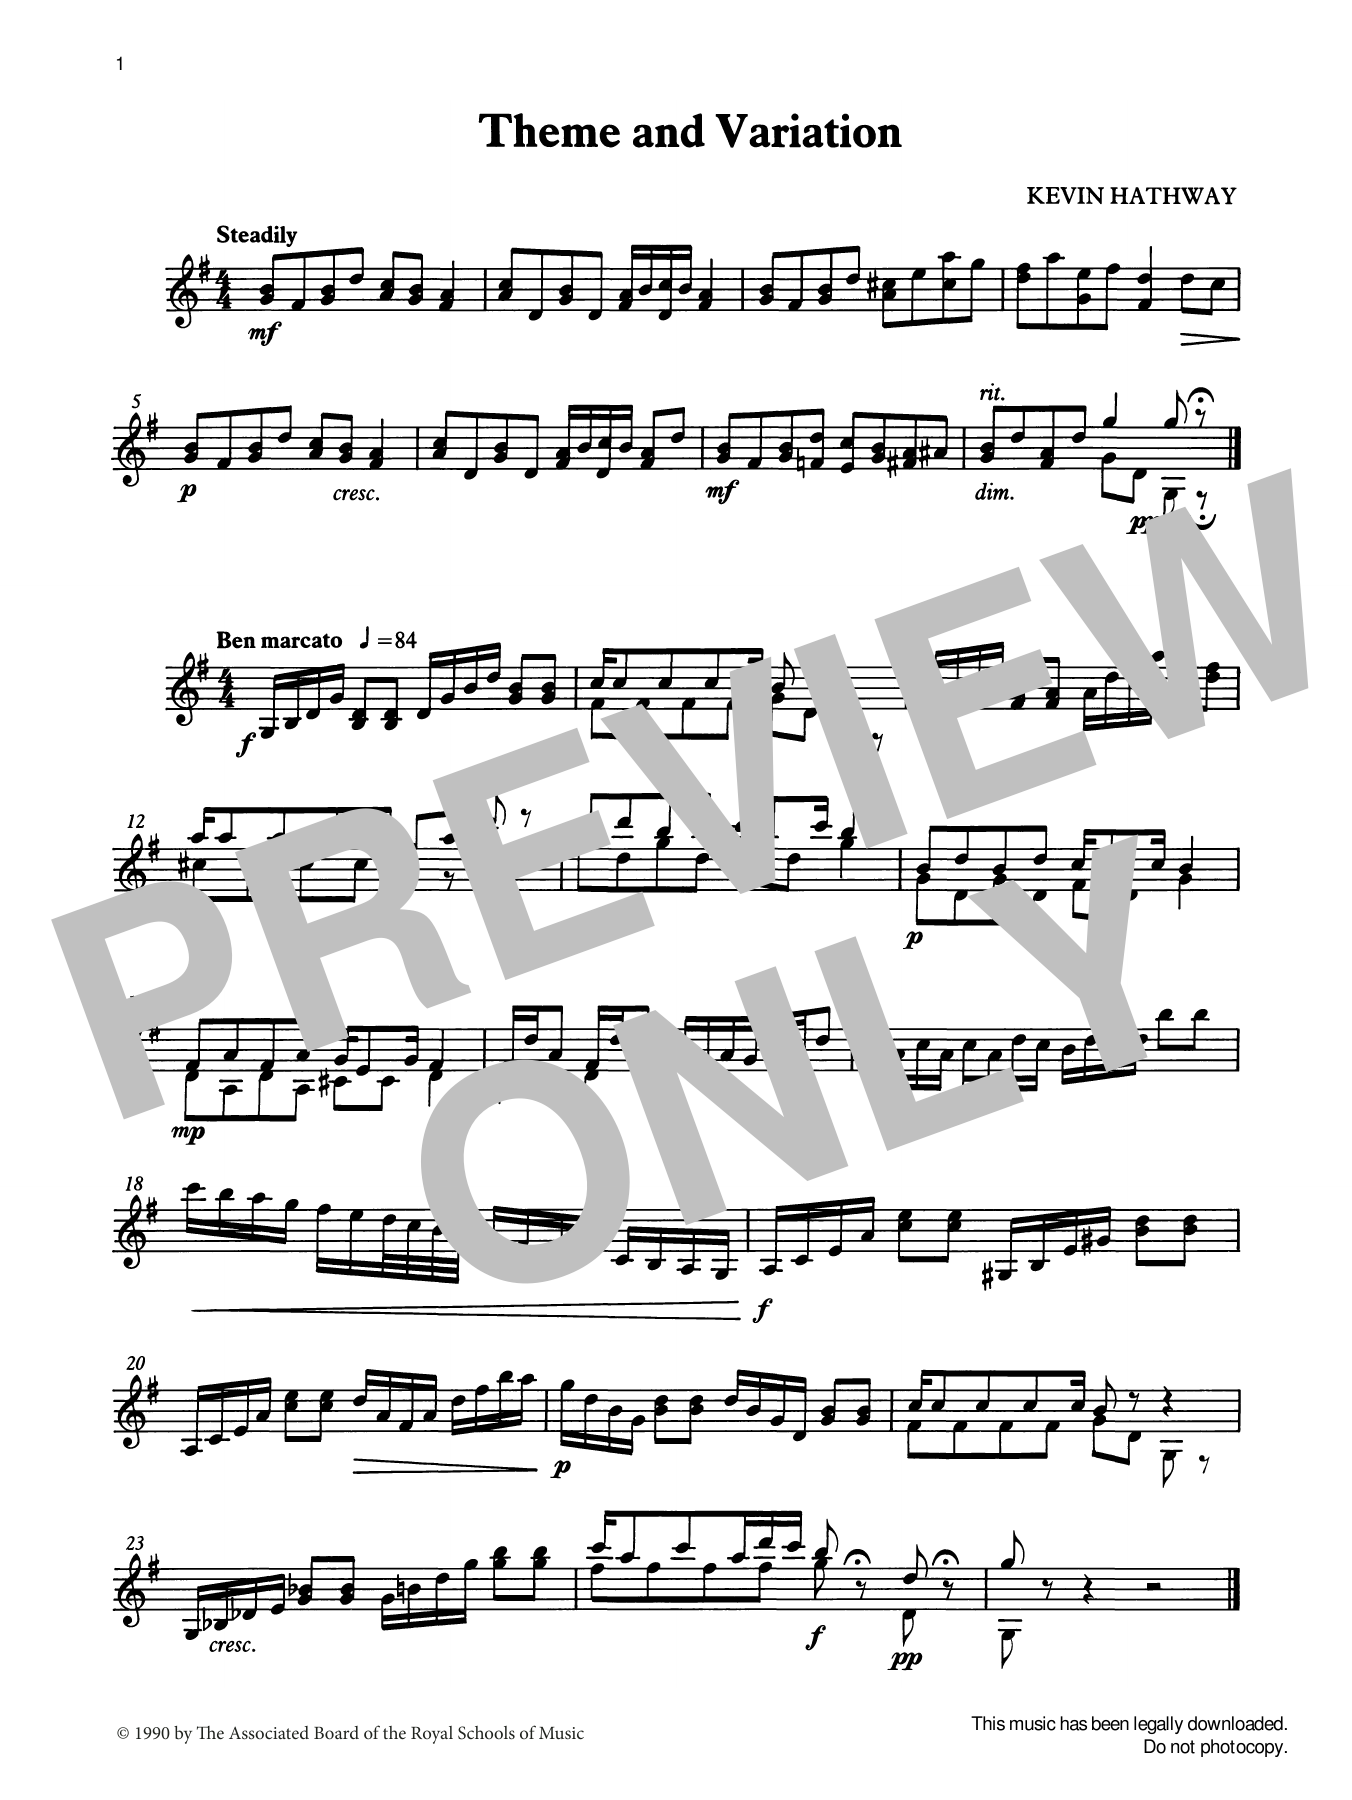 Download Ian Wright and Kevin Hathaway Theme and Variation from Graded Music f Sheet Music